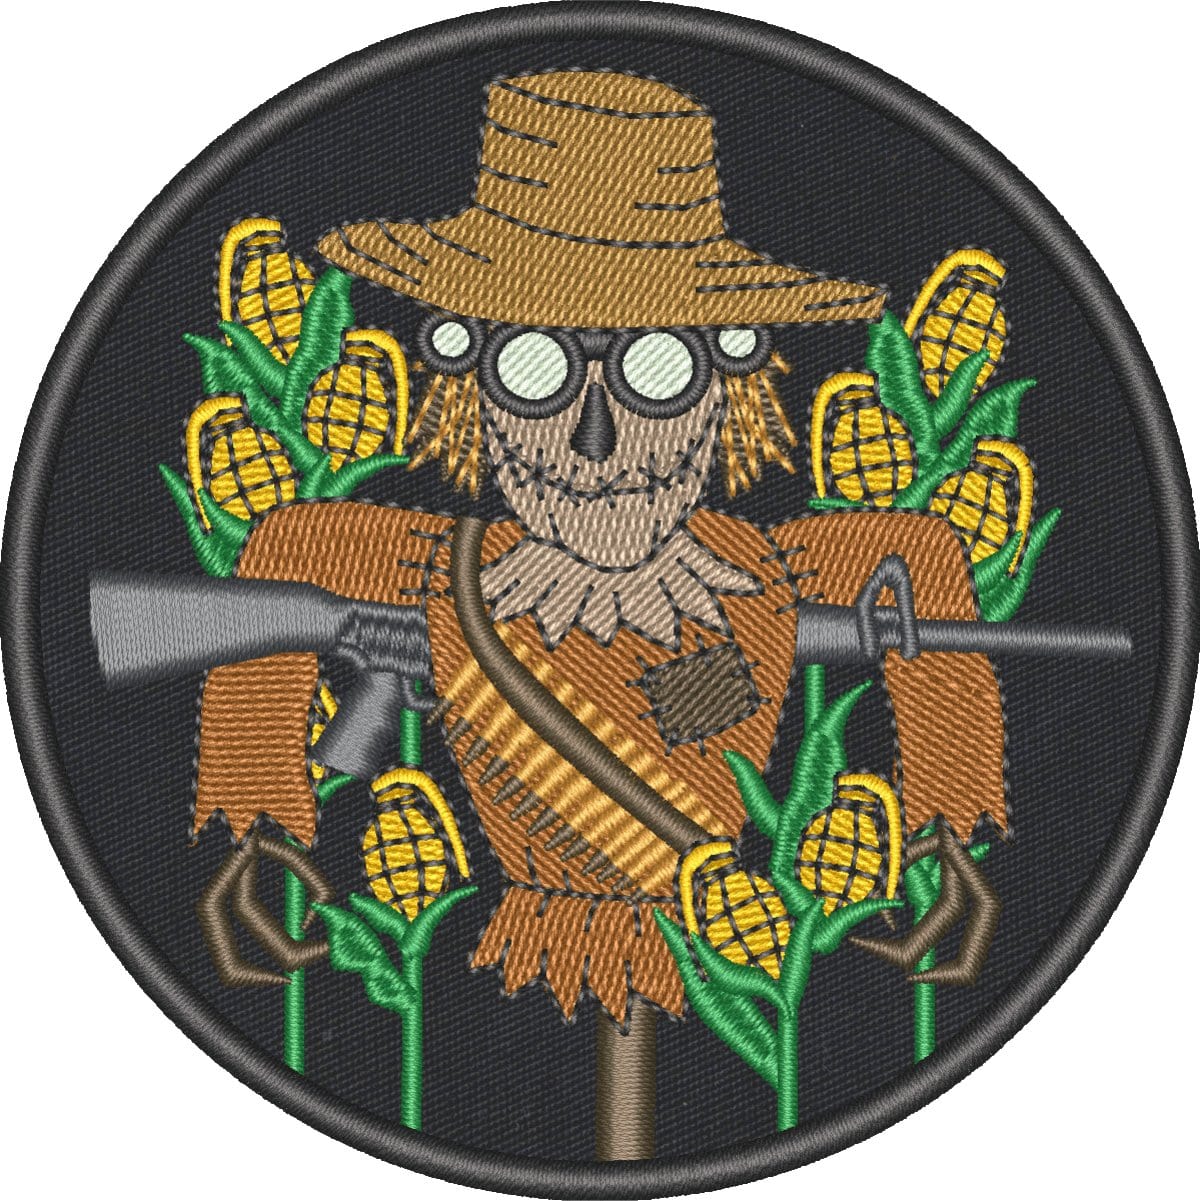 Tactical Gear Junkie Patches November 2023 POTM - Tactical Scarecrow - The Corn Field Goon - 4" Patch